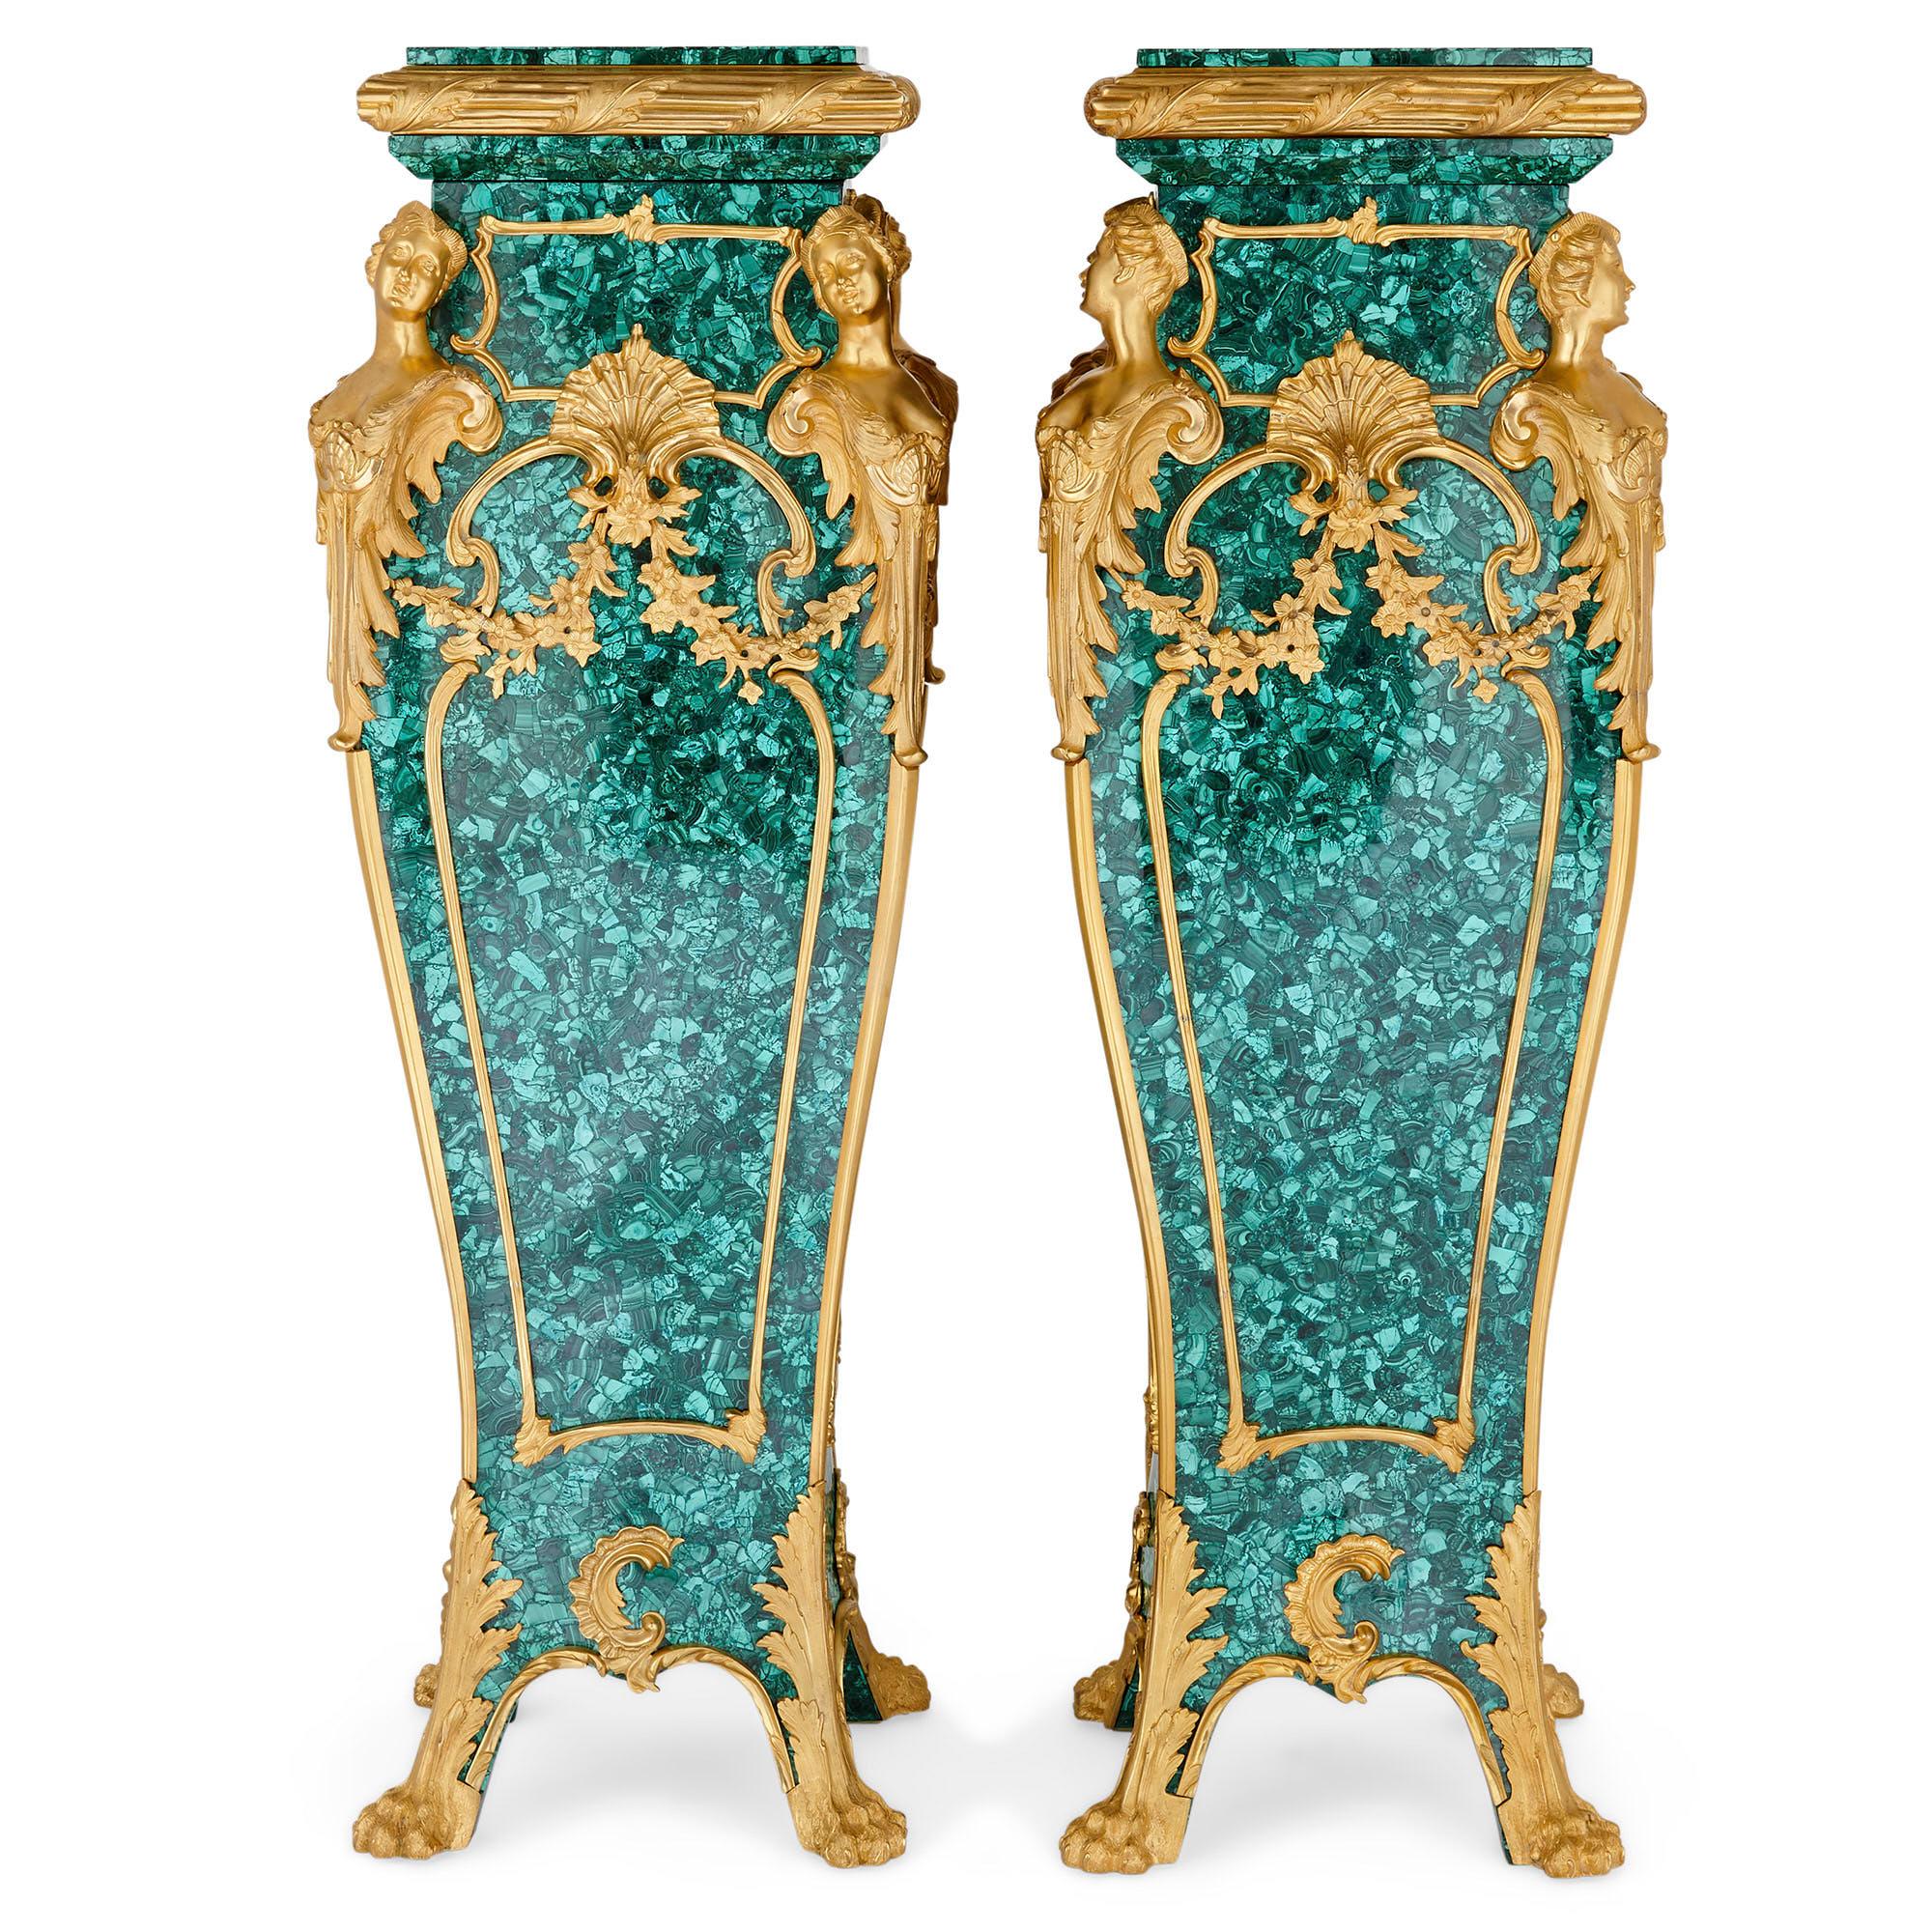 Pair of Louis XV style gilt bronze and malachite stands
French, 20th century
Measures: Height 117cm, width 40cm, depth 40cm

This pair of malachite and ormolu pedestals are crafted in the bombe shape, in the manner of important French maker